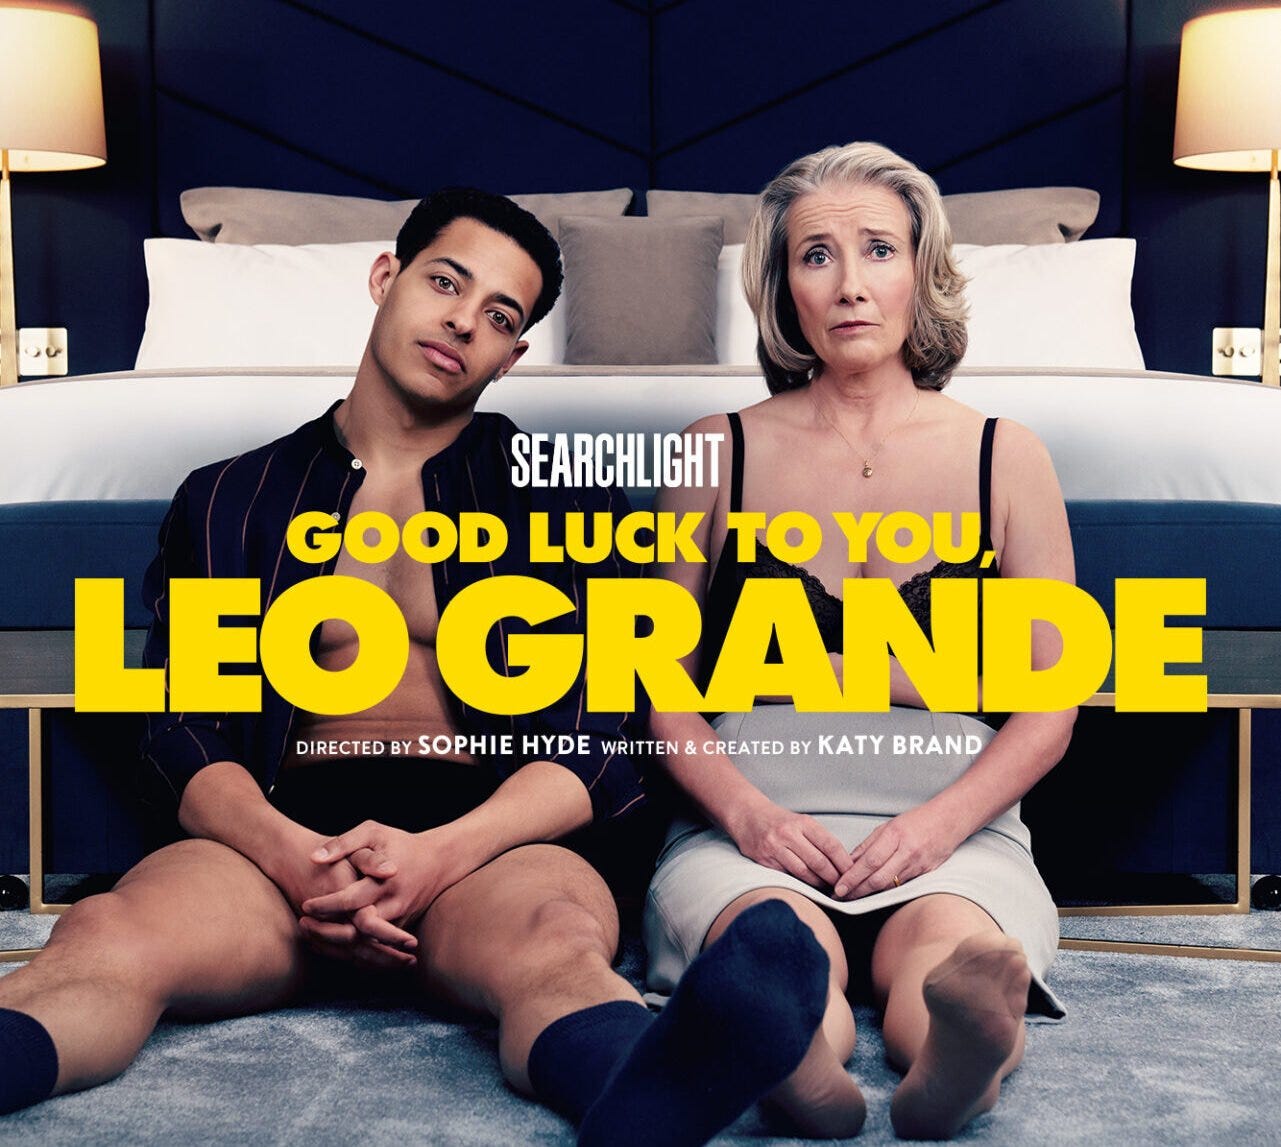 New 'Good Luck To You, Leo Grande' Poster Released - Disney Plus Informer